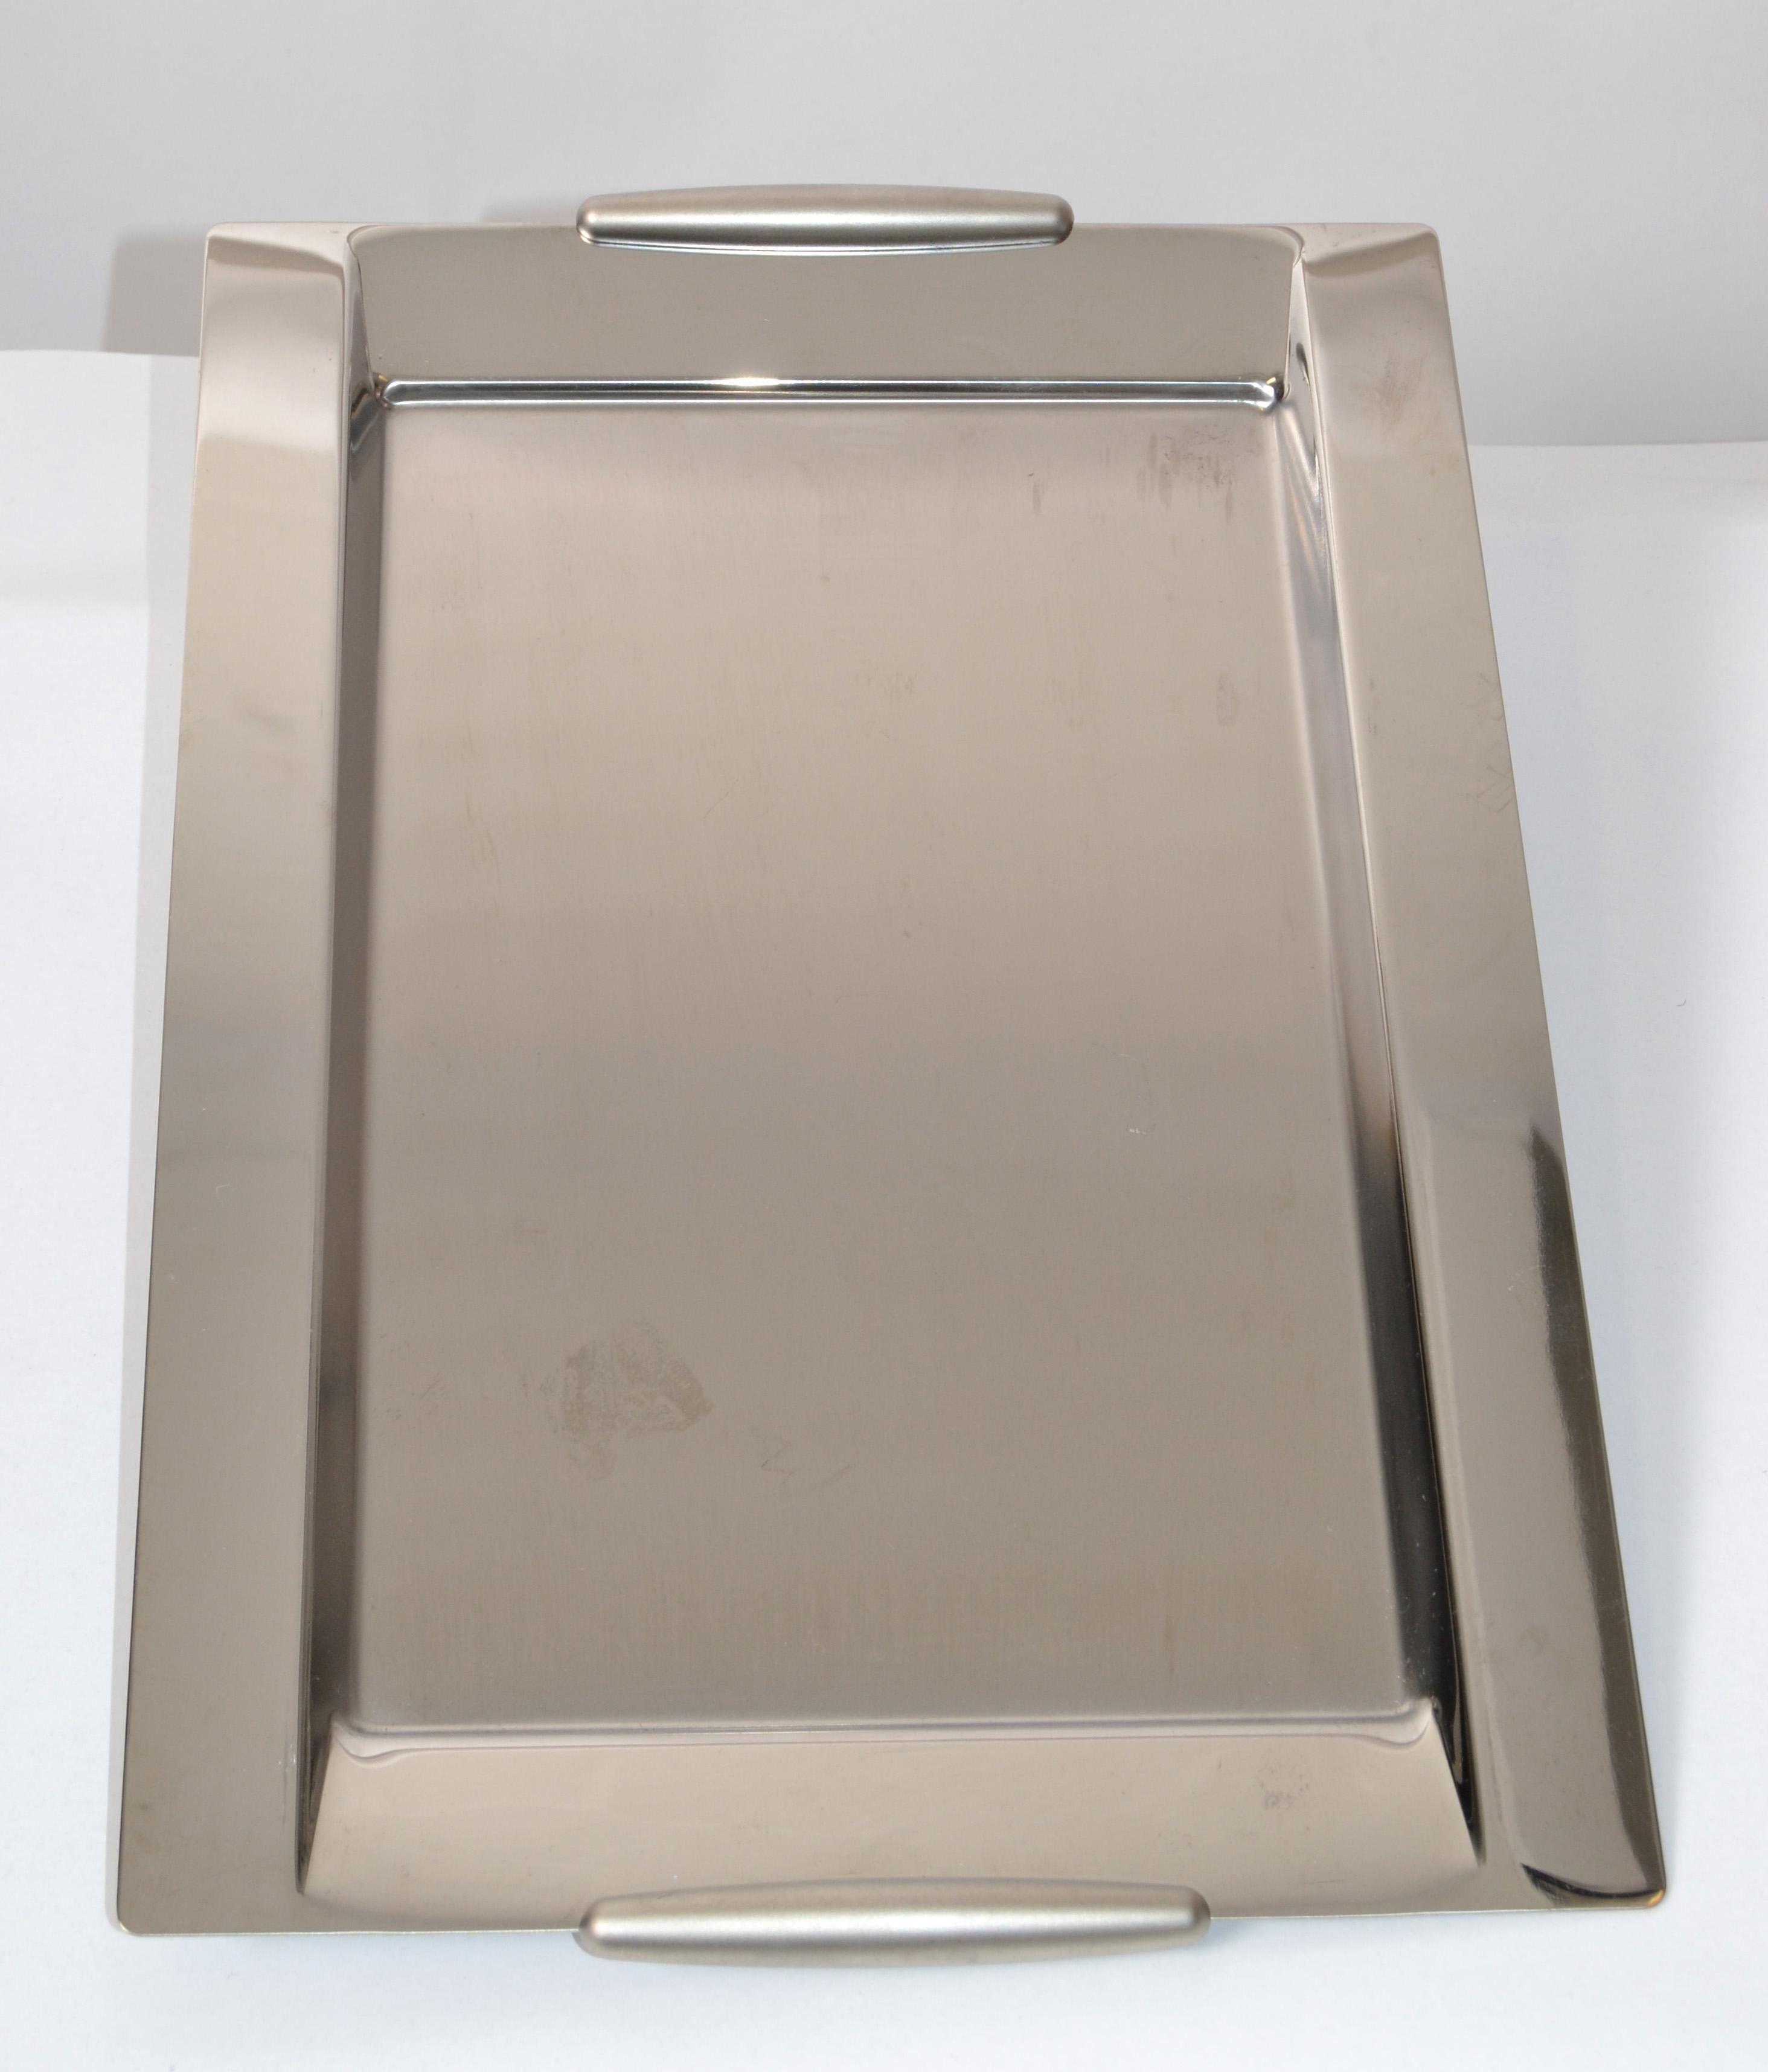 Mid-Century Modern decorative serving tray or platter made out of stainless steel 18/10 made in Italy by WMF Pinnacle Italy.
Marked at the Base.